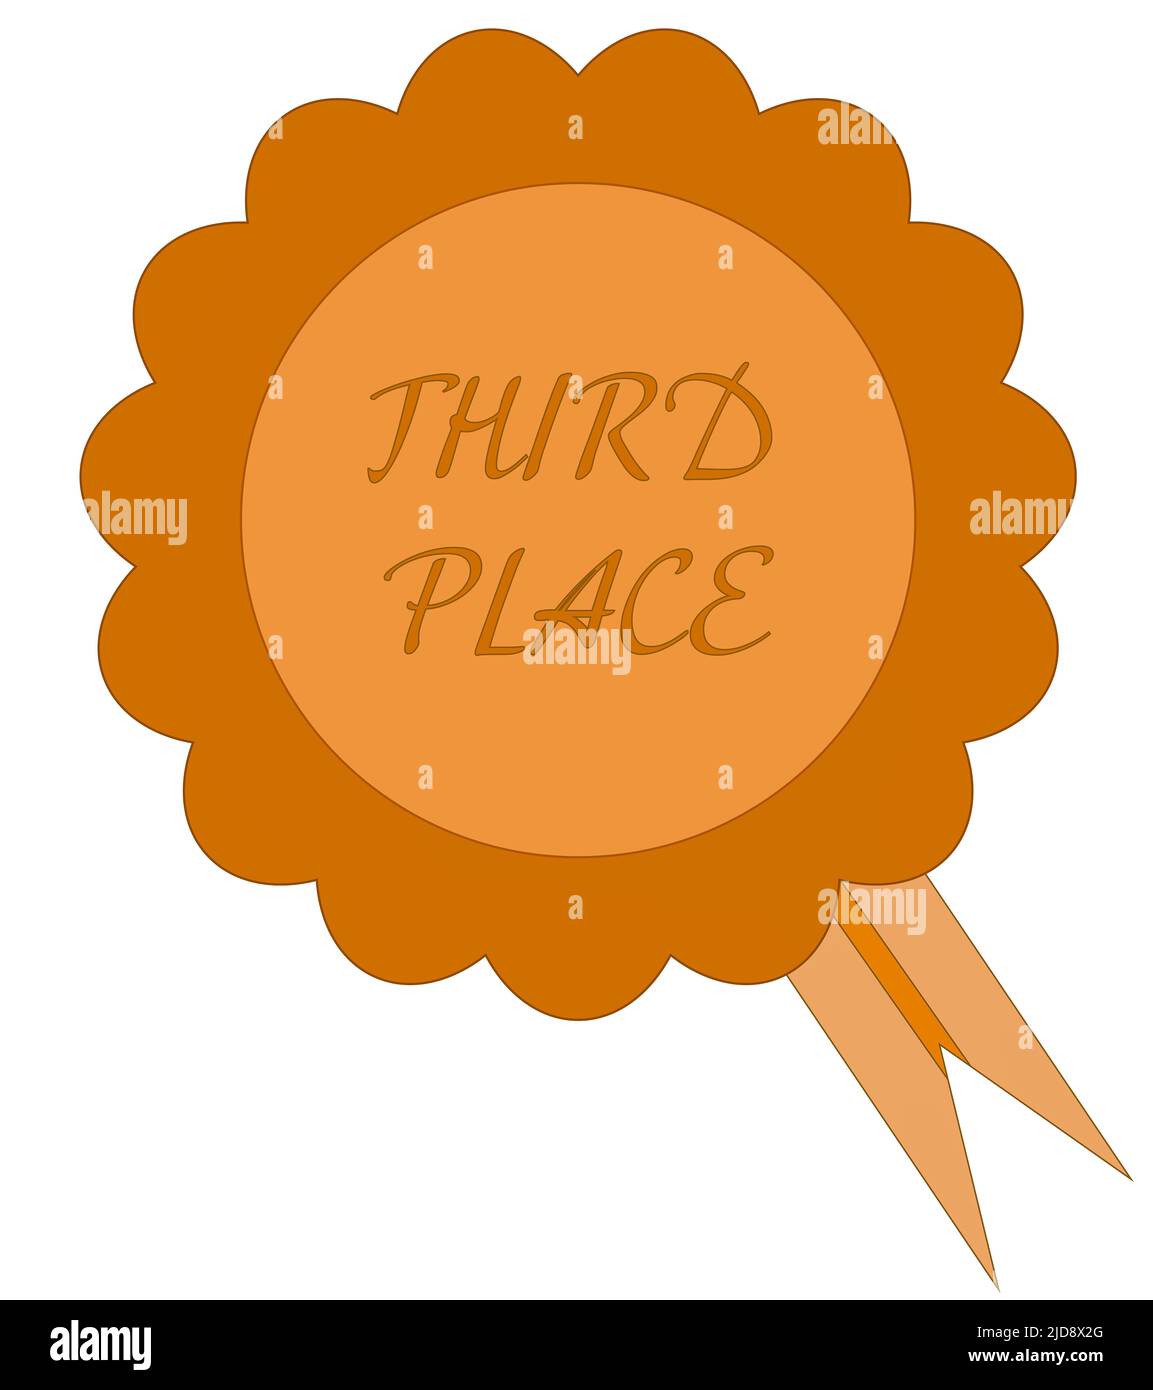 A graphic illustration of A third place rosette for use as an icon, logo or web decoration Stock Photo